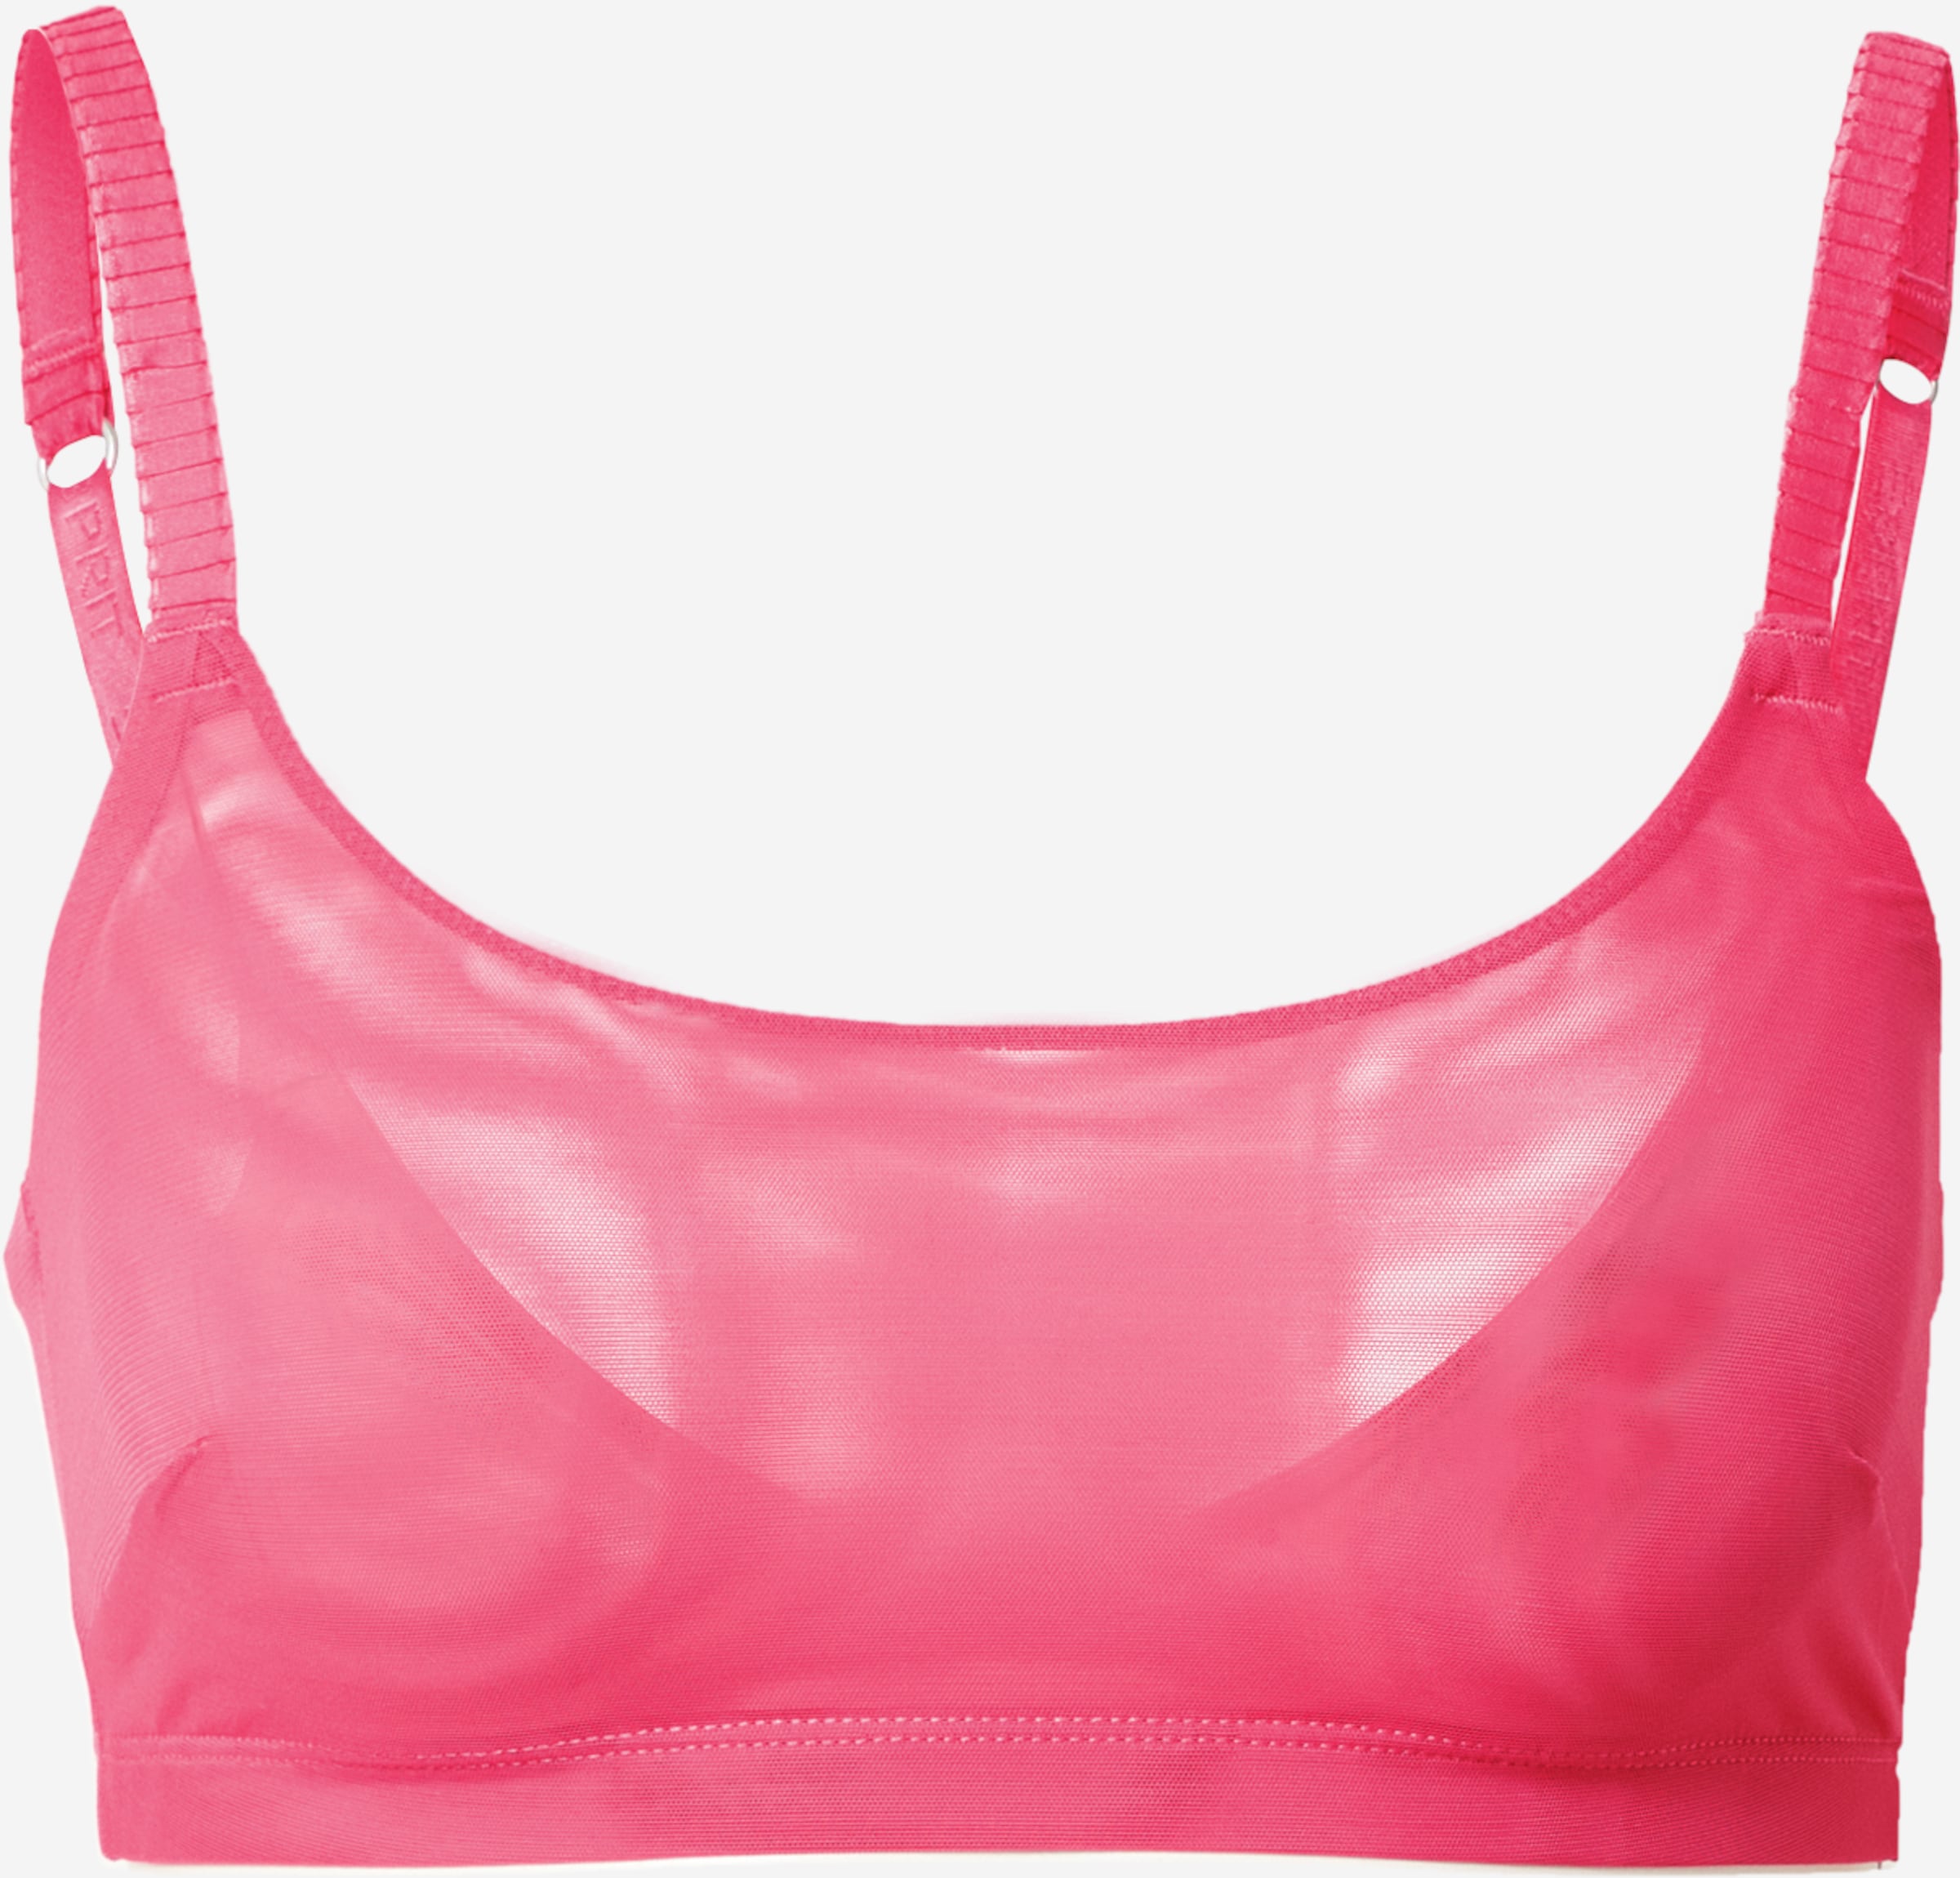 ESPRIT Bra in | ABOUT YOU